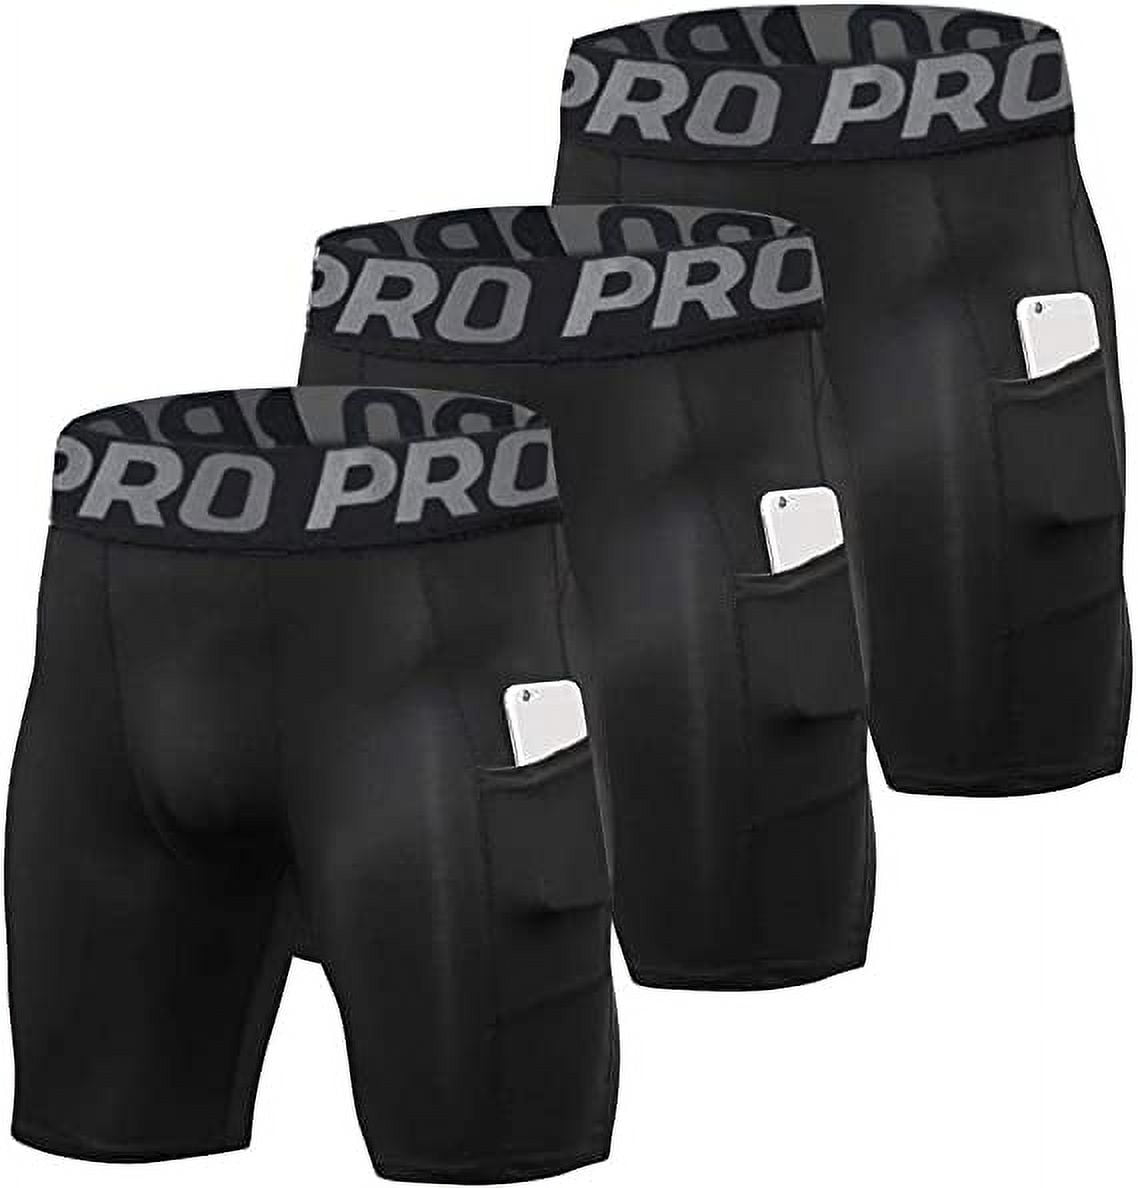 YUSHOW Men's Compression Shorts 3-Pack - High-Performance, Workout Gear ...